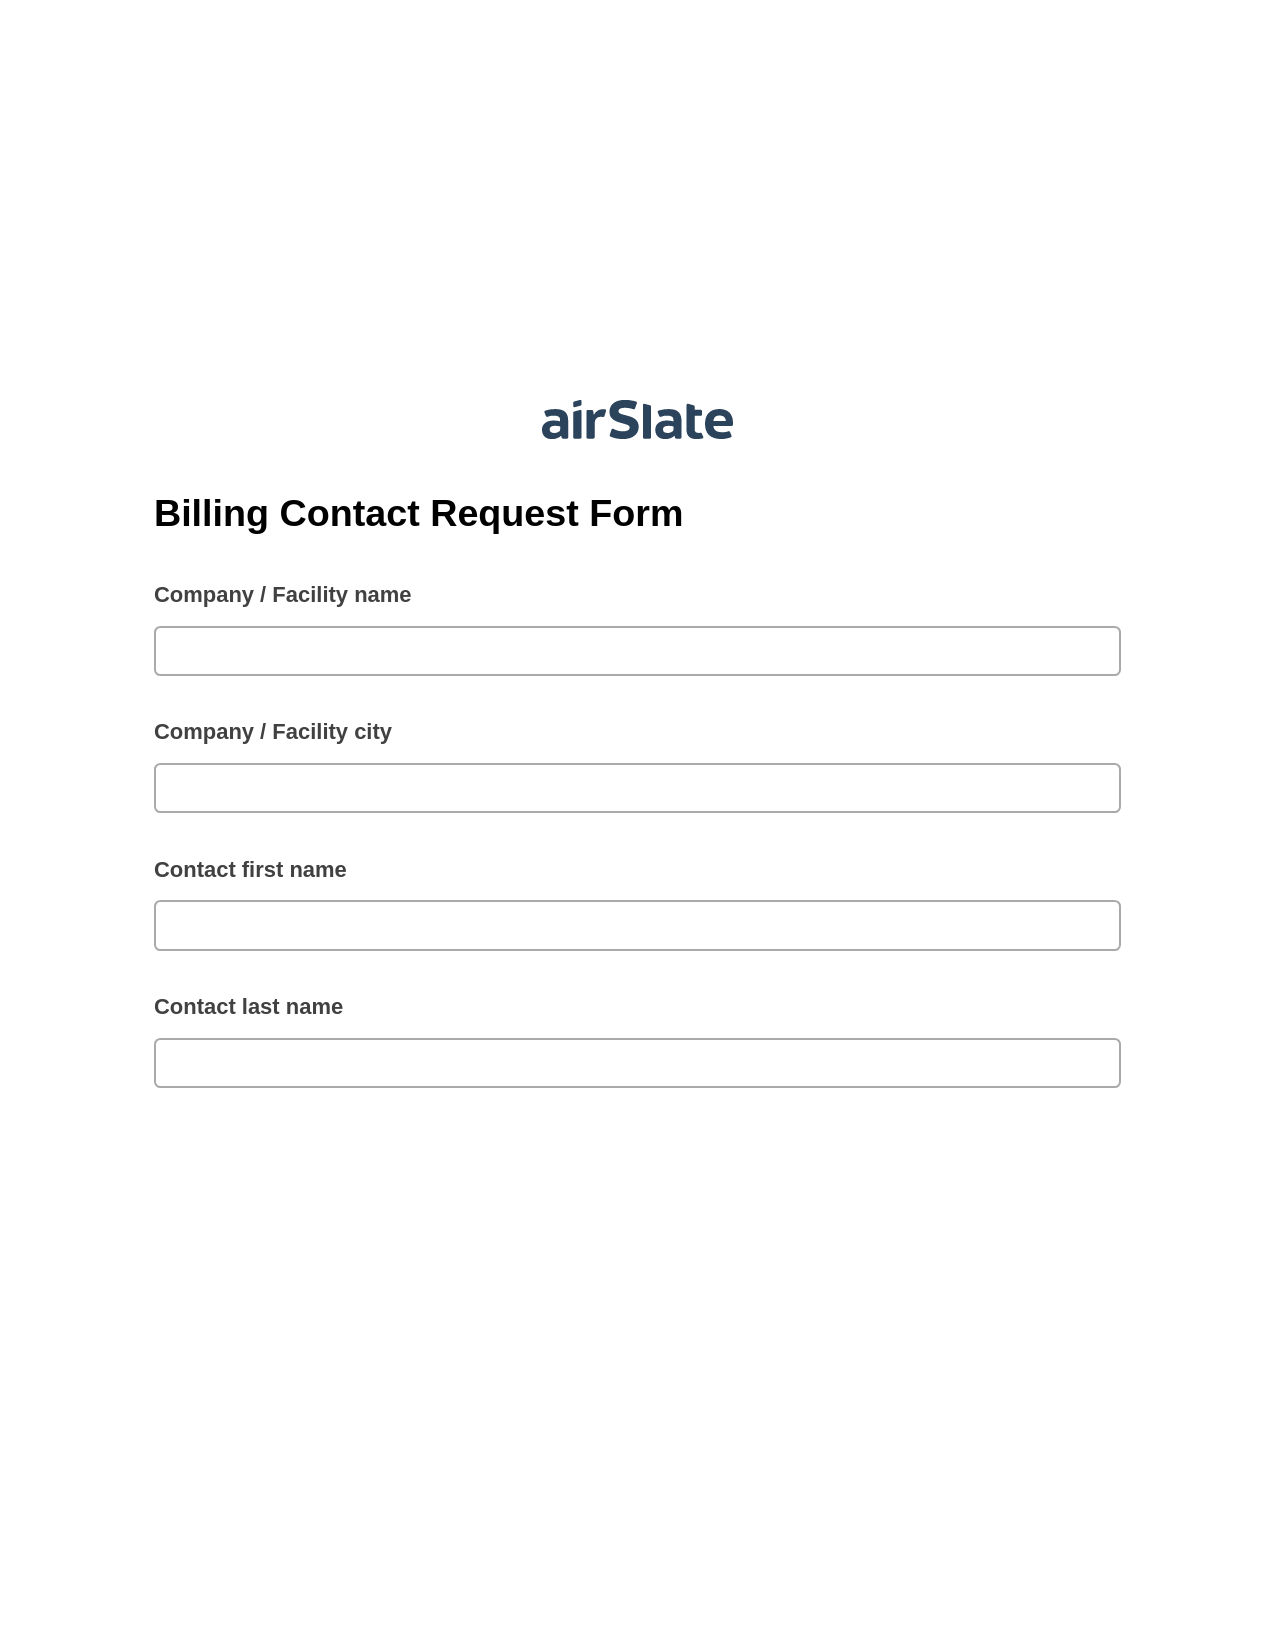 Multirole Billing Contact Request Form Pre-fill from another Slate Bot, Document Hide Bot, Export to Smartsheet